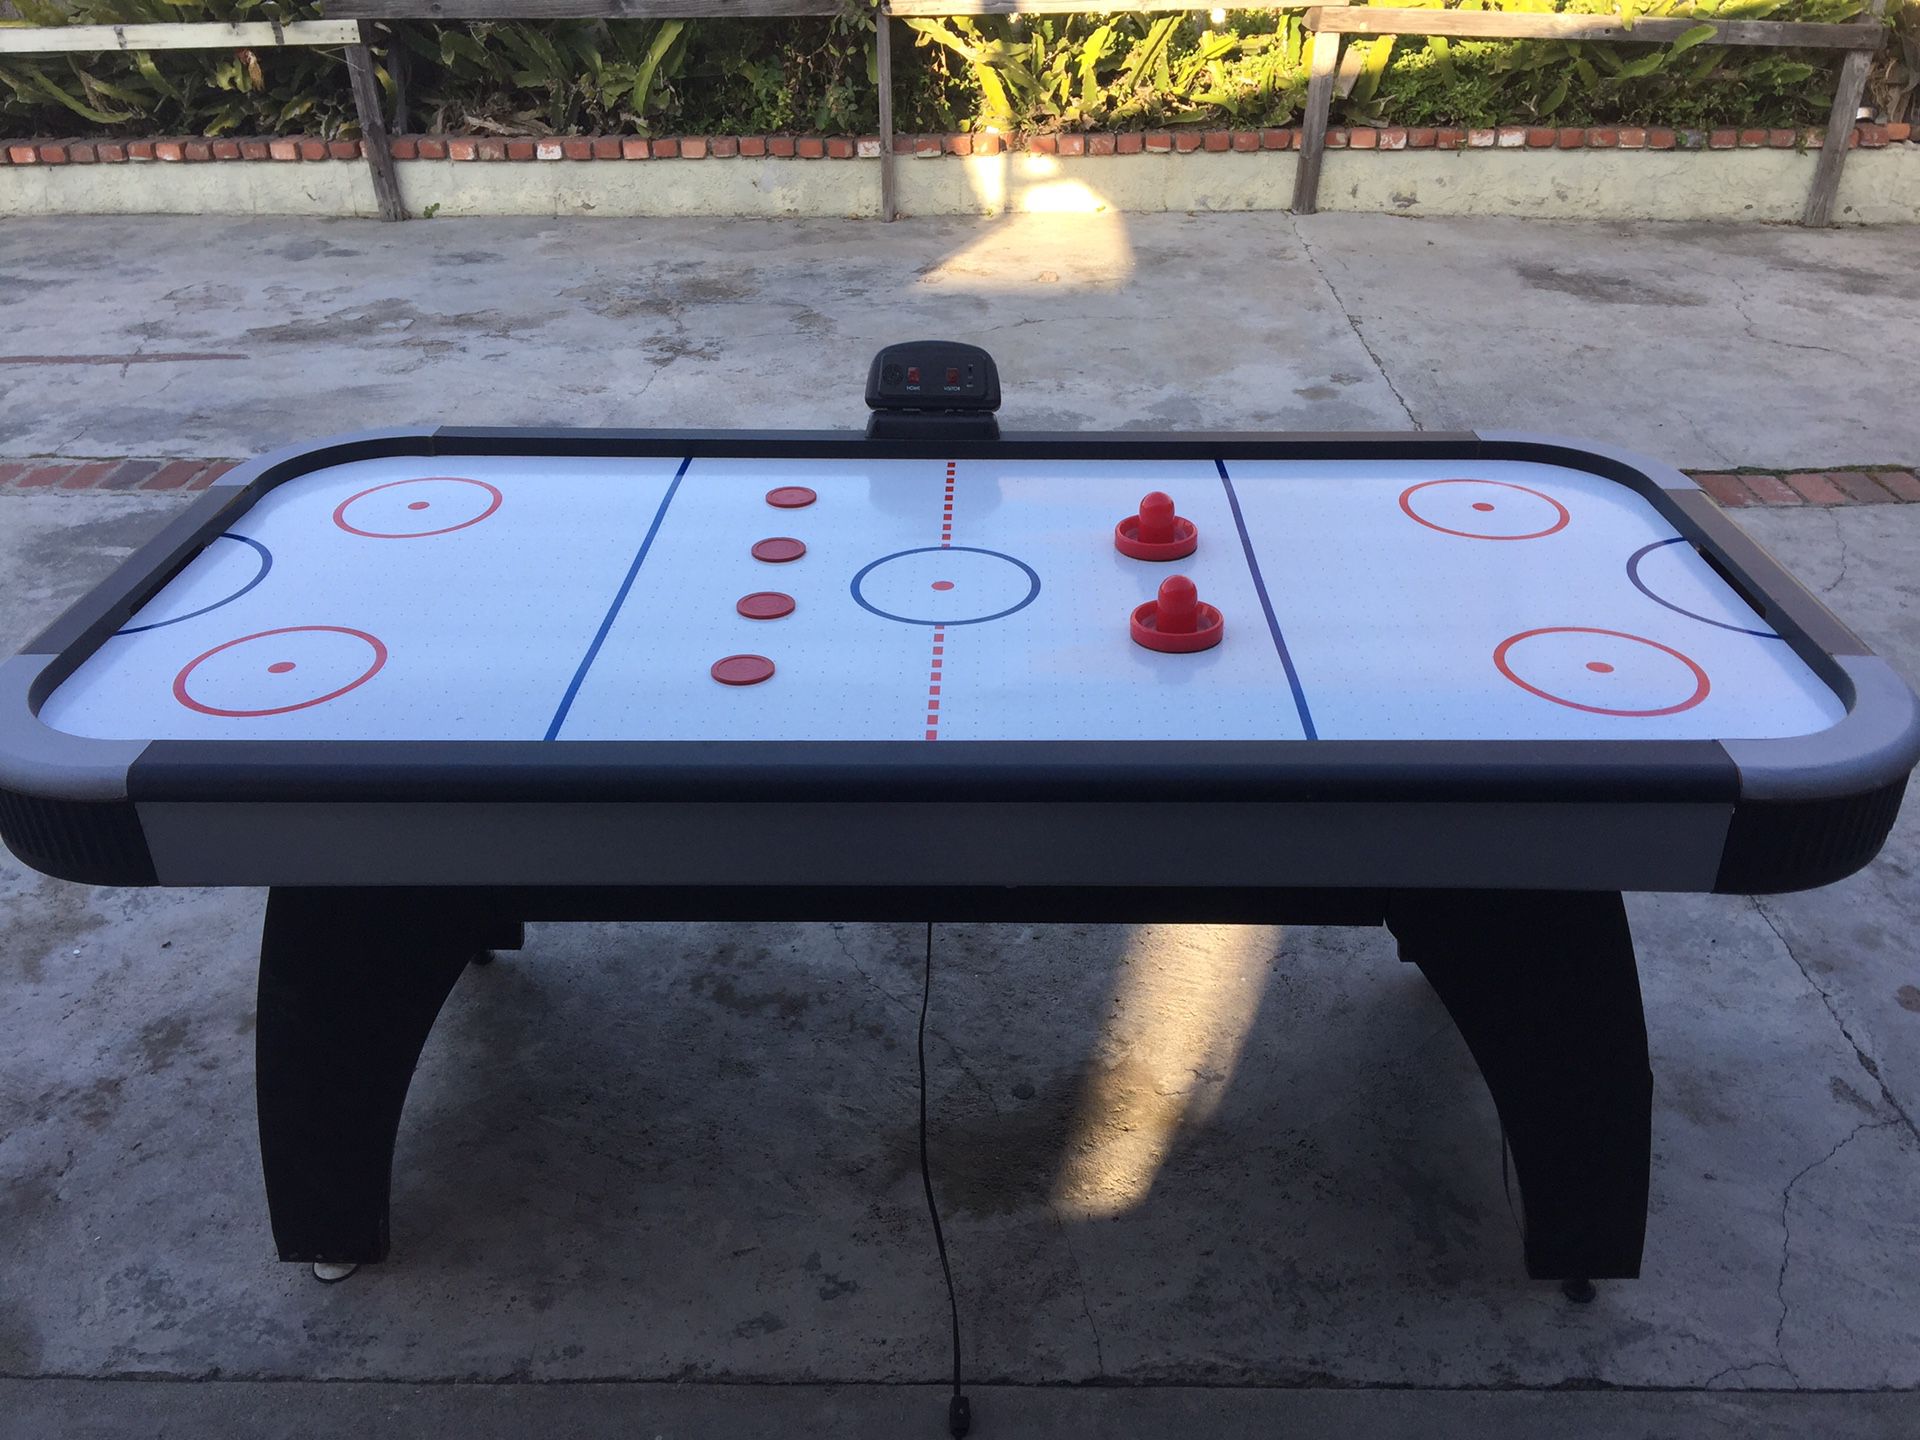 72 Inch Air Hockey Table with Electronic Scoreboard